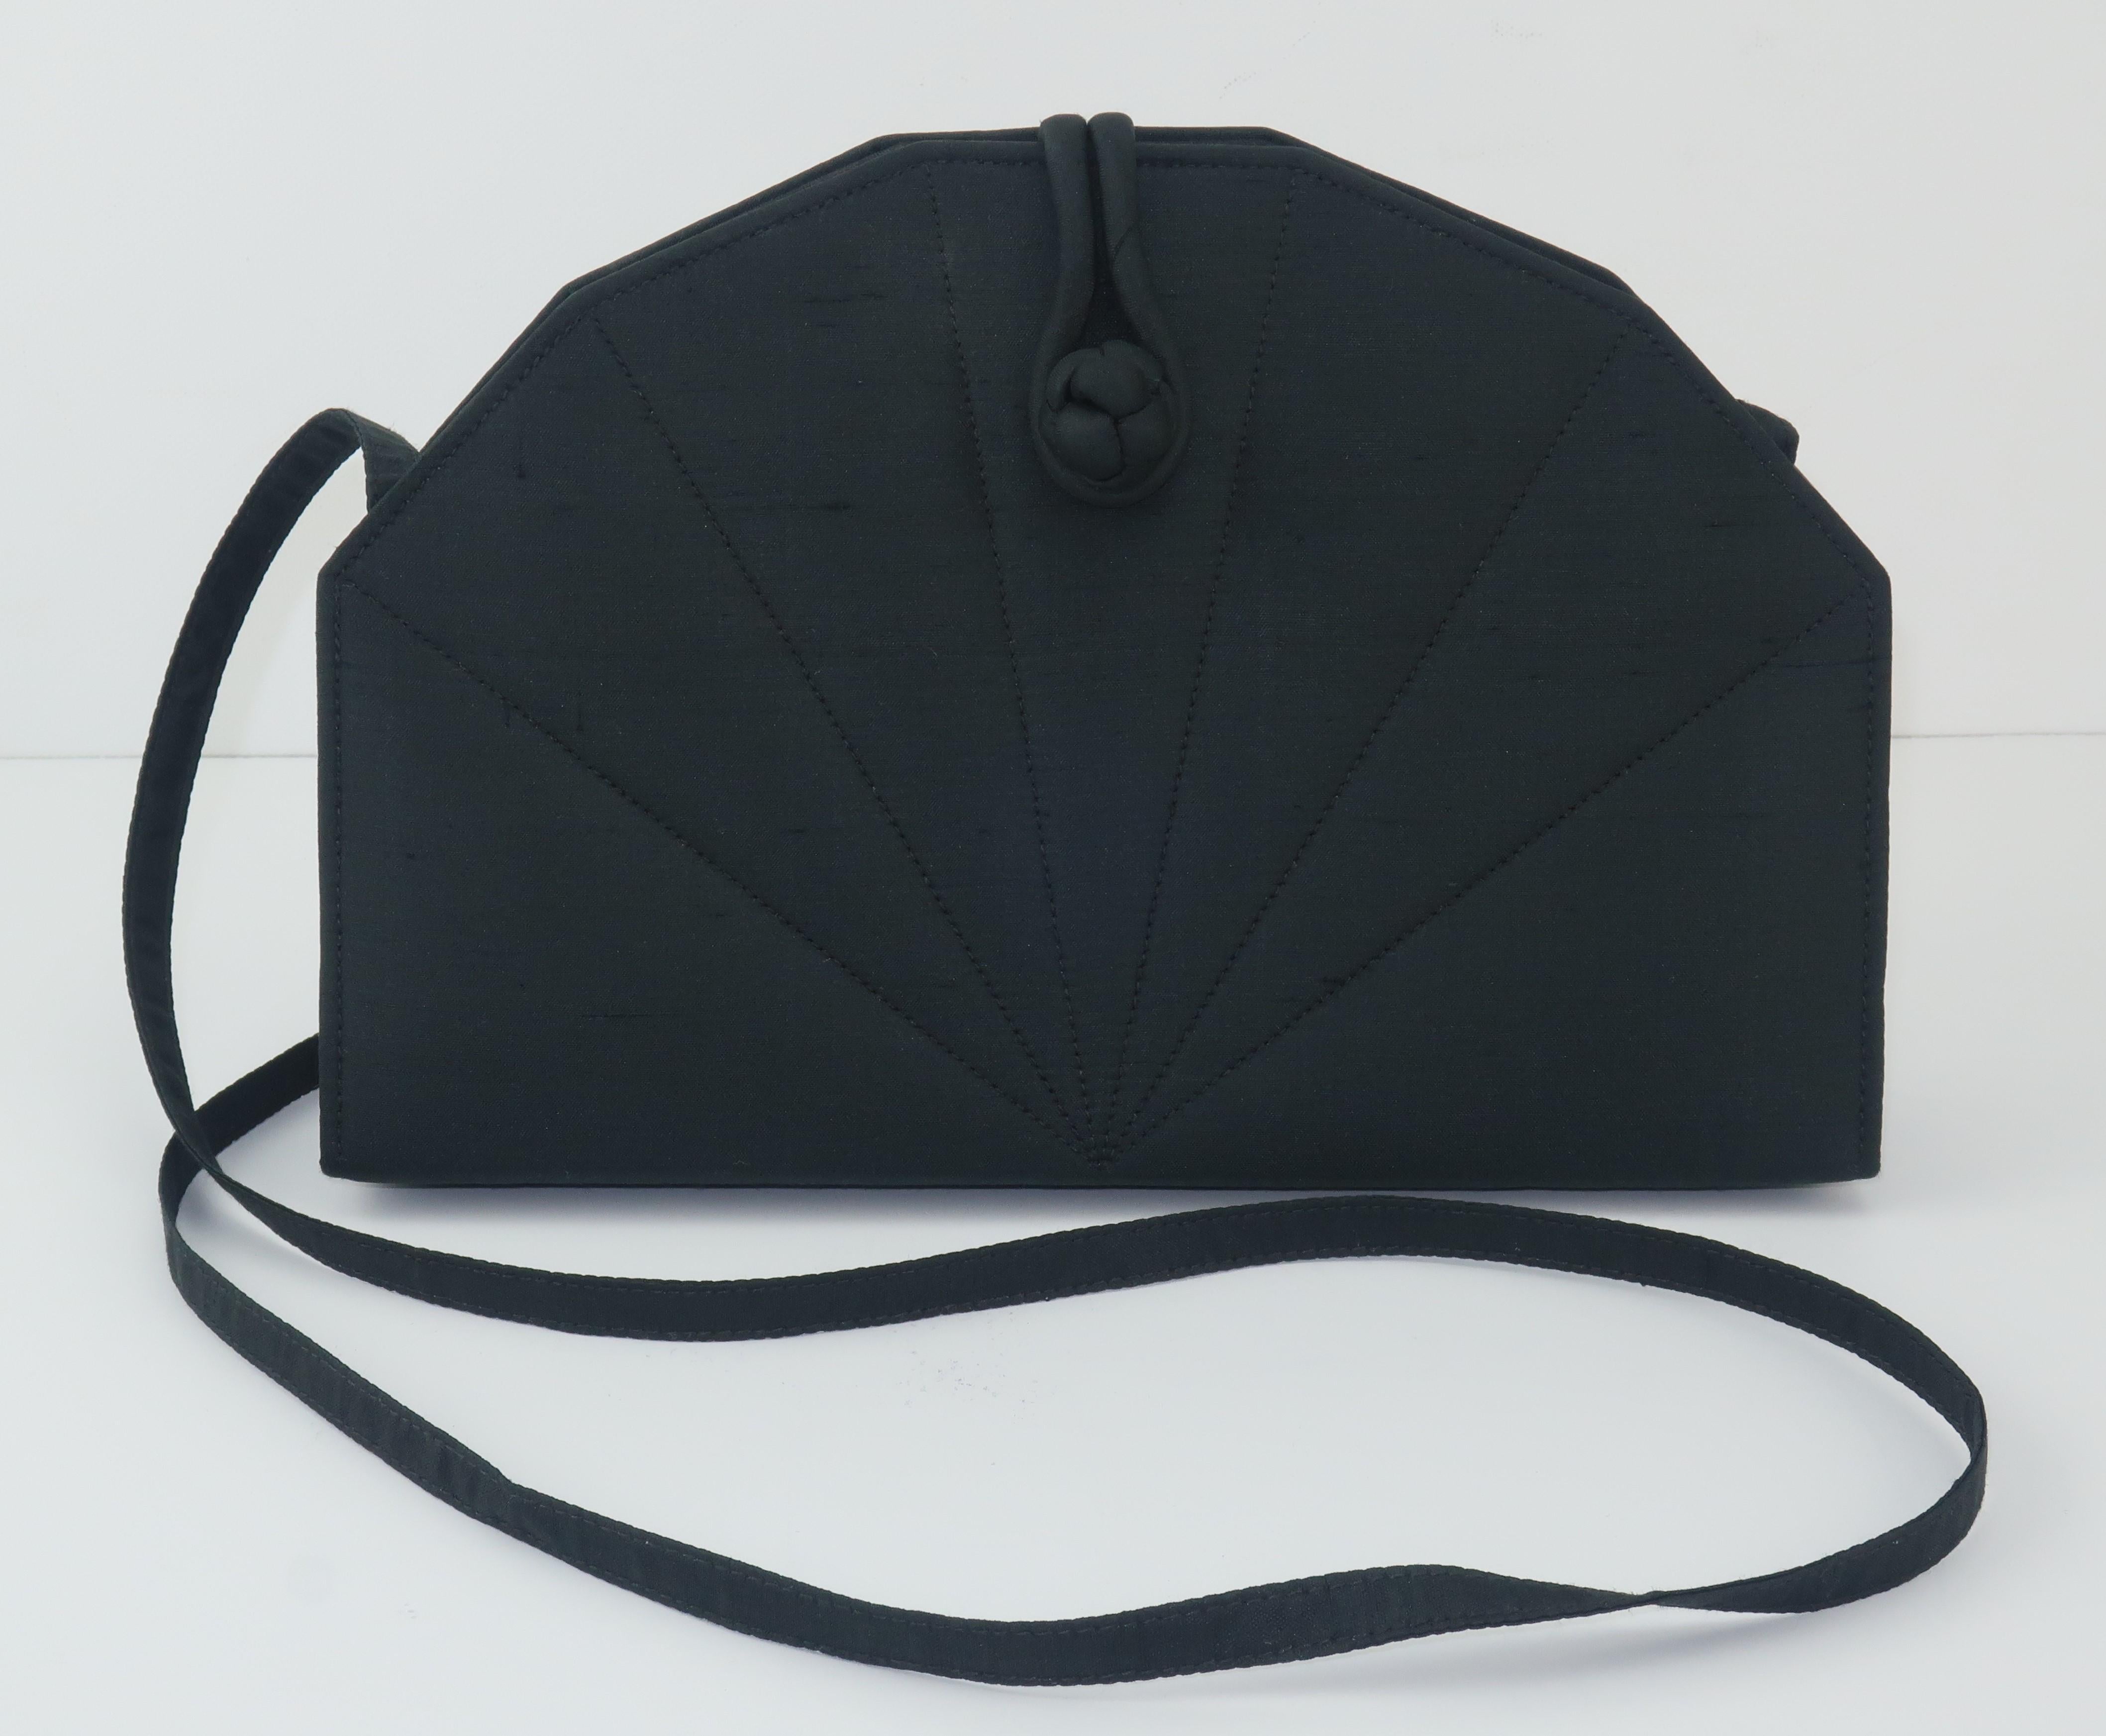 This lovely black fan shaped handbag was created by Jim Thompson Thai Silk Company, a name usually associated with fine fabrics for interior upholstery and home decor.  It is a simple design with a lightweight style that is suitable for day or